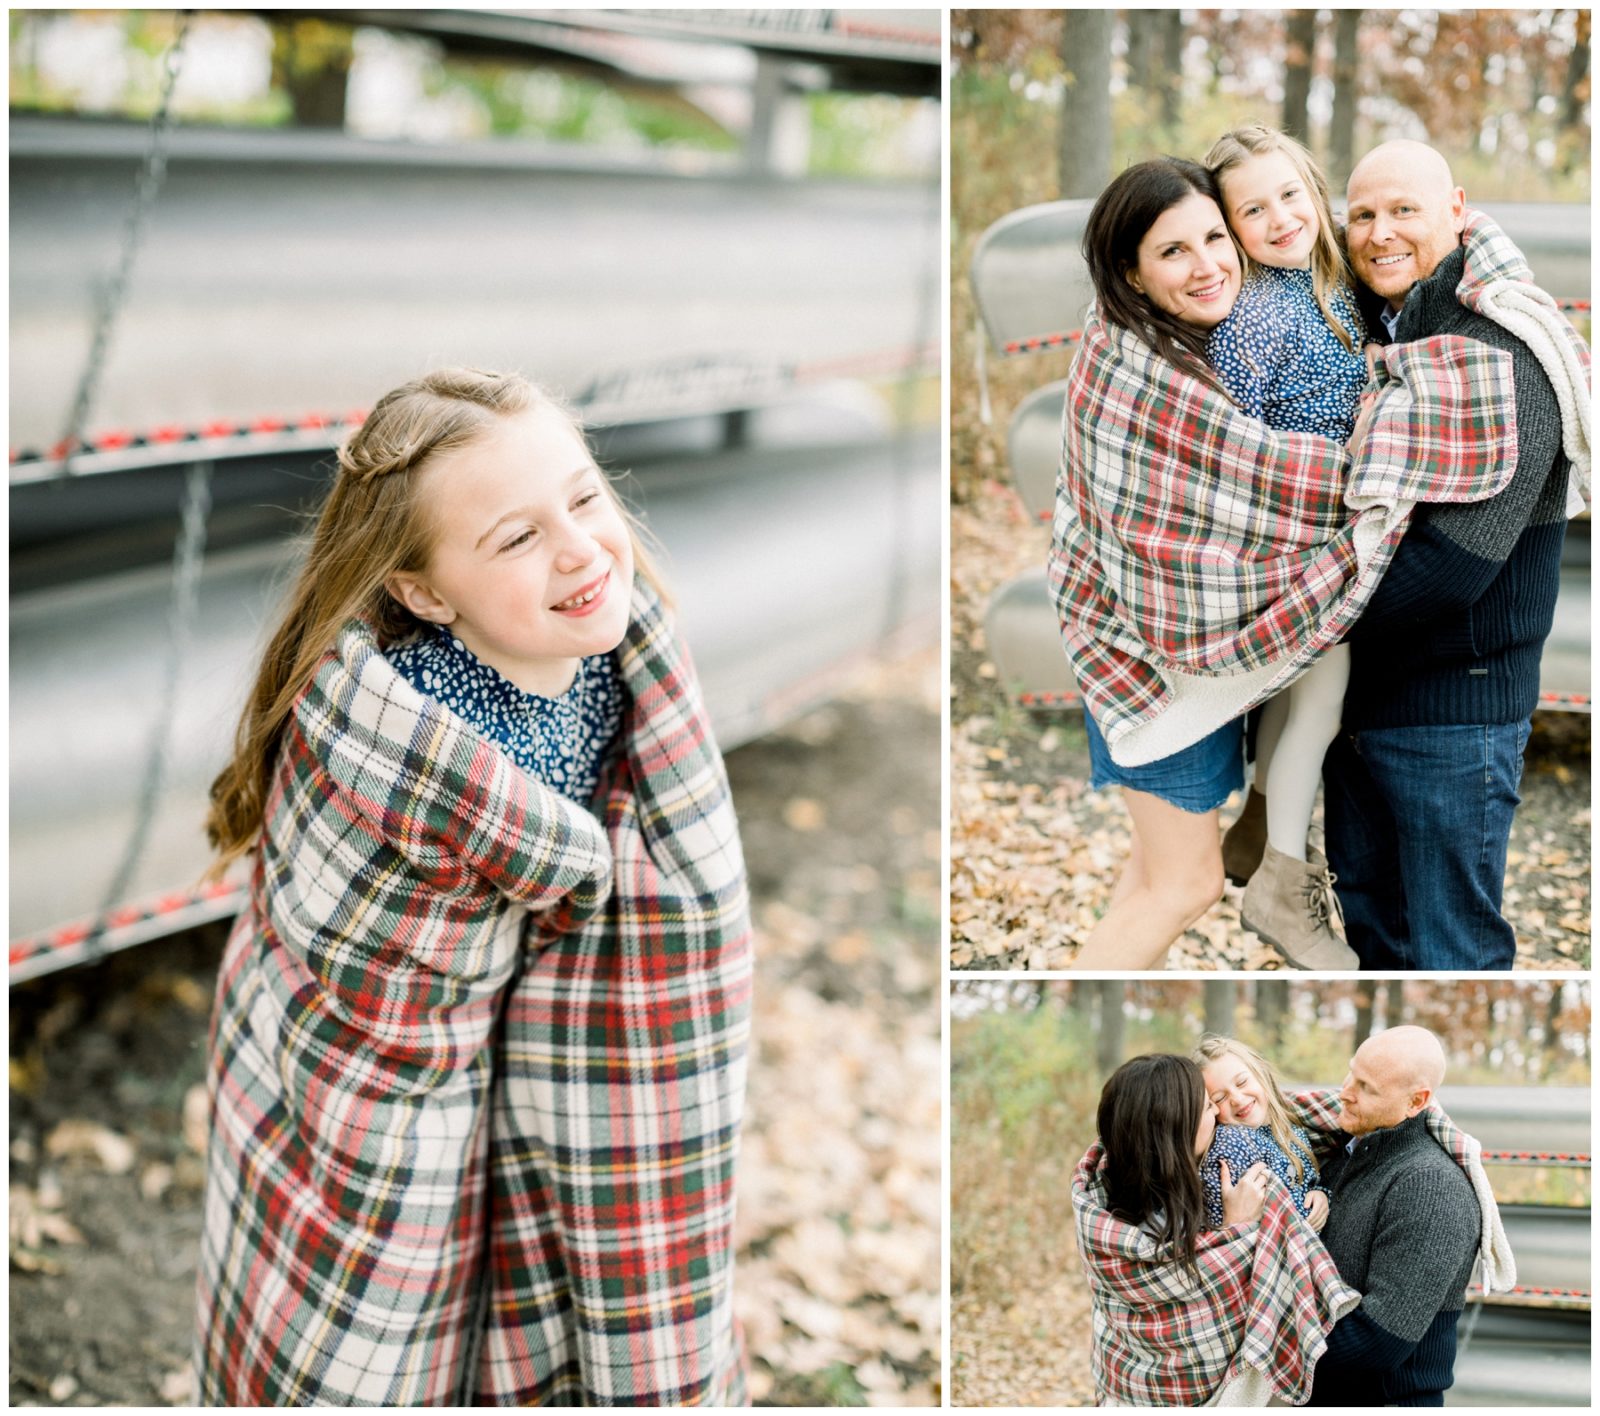 Golden Hour Fall Family Photos with family wrapped in cozy blankets